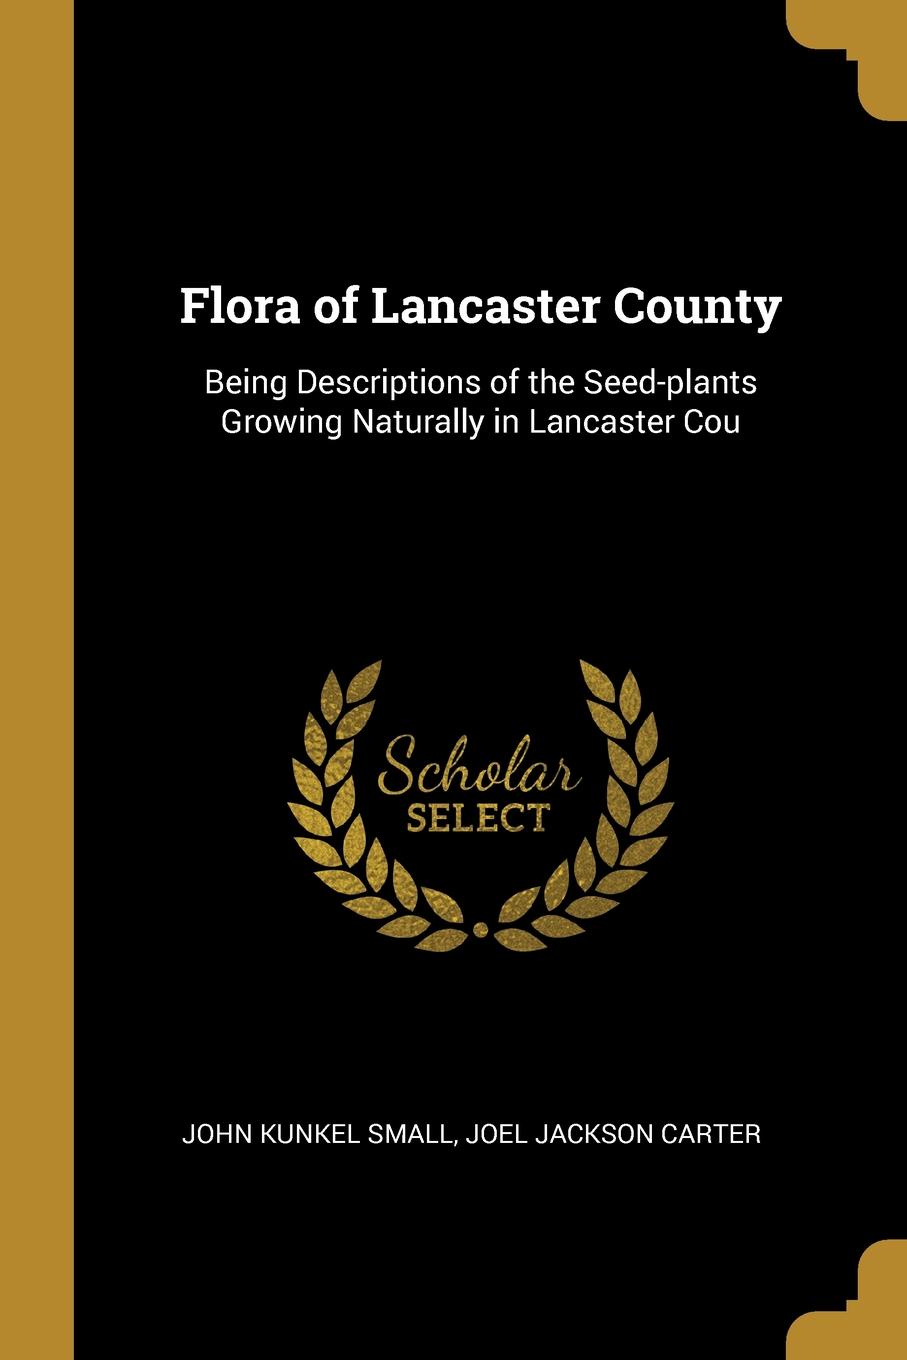 Flora of Lancaster County. Being Descriptions of the Seed-plants Growing Naturally in Lancaster Cou